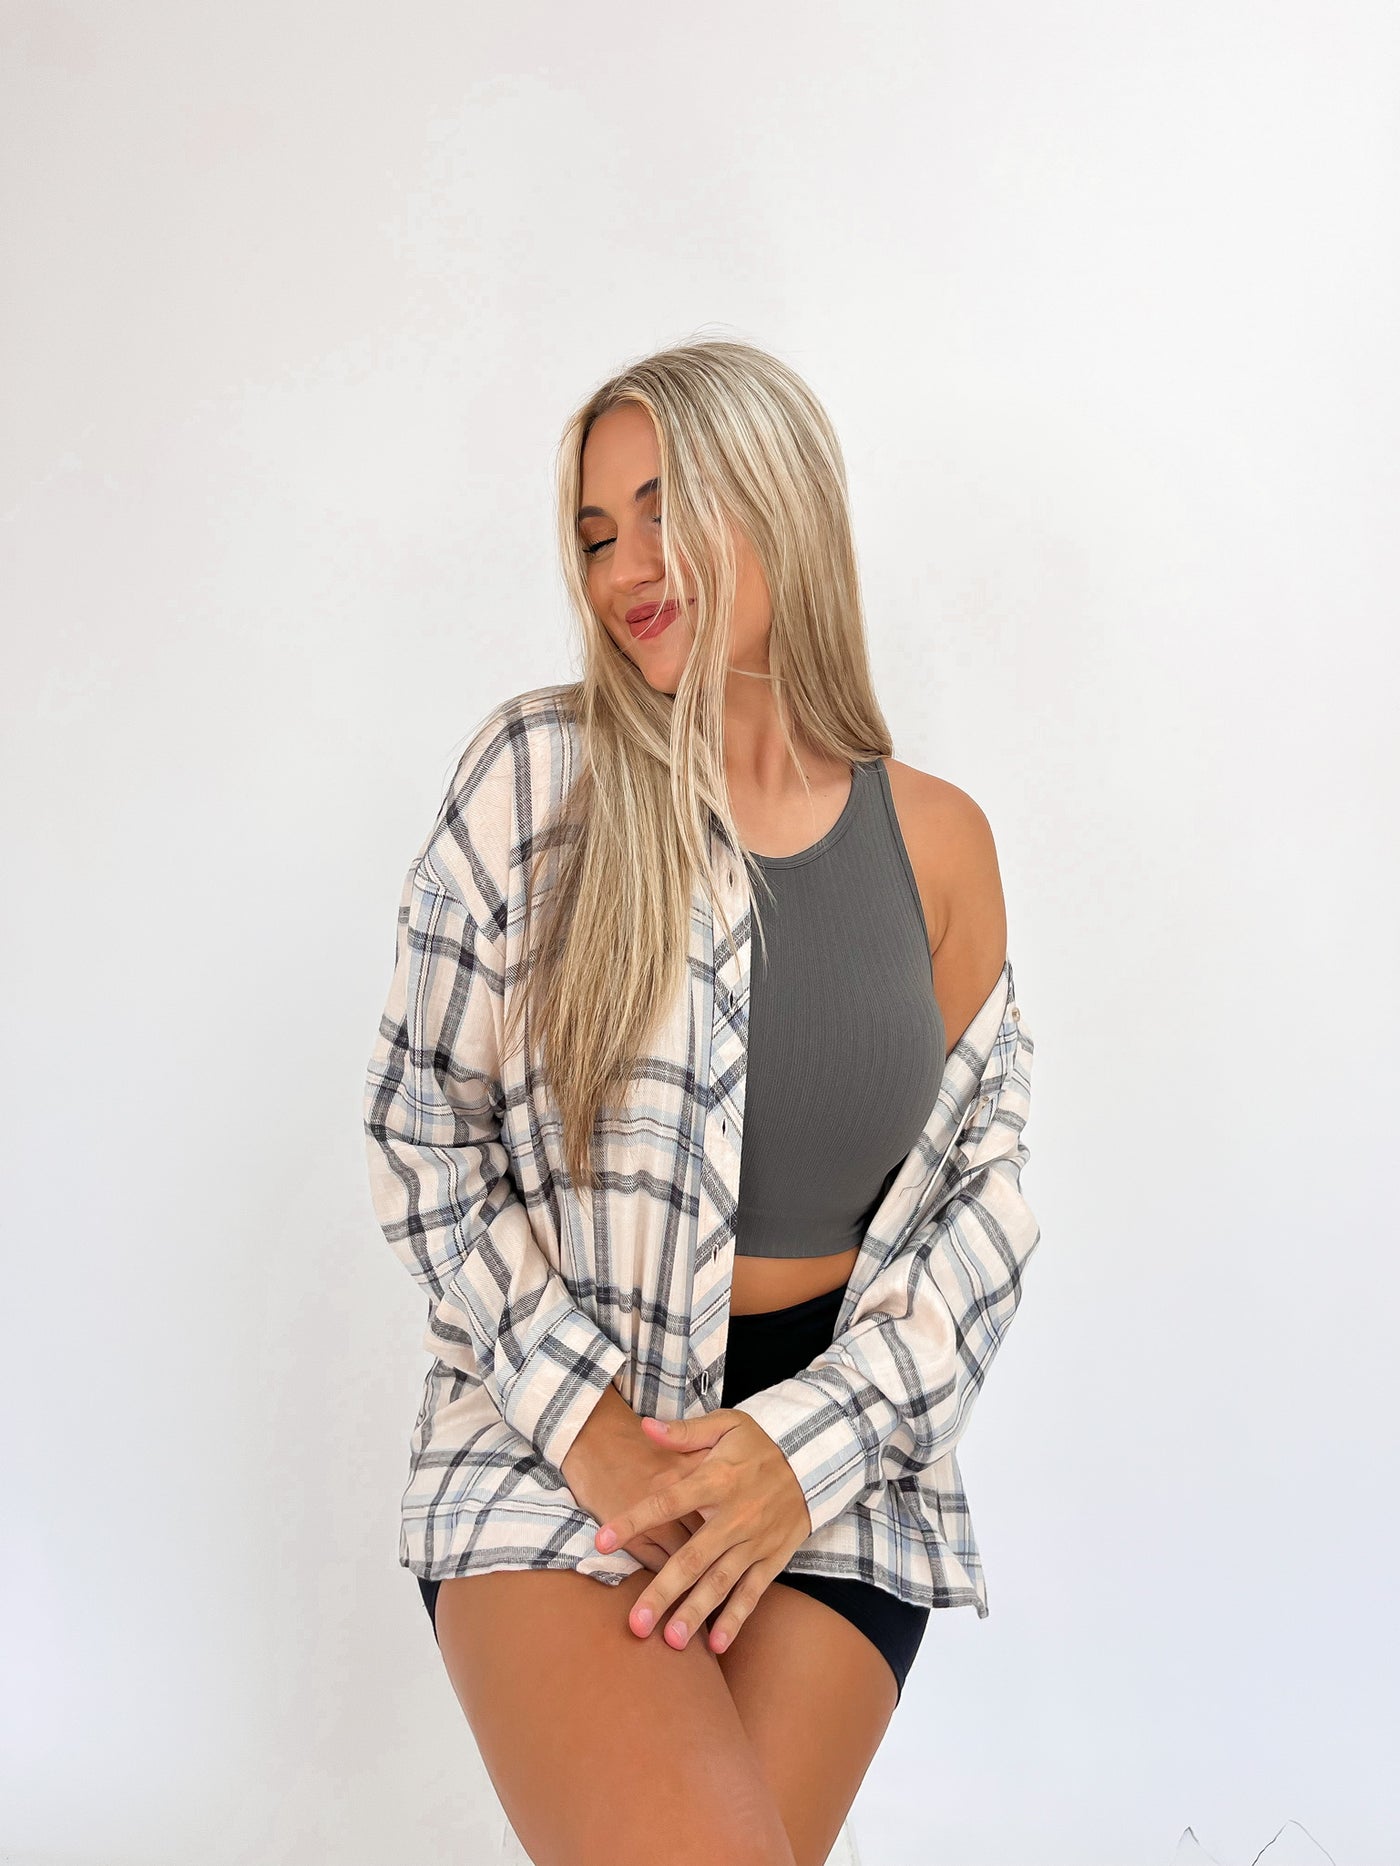 Searching For Comfort Boyfriend Flannel Shirt